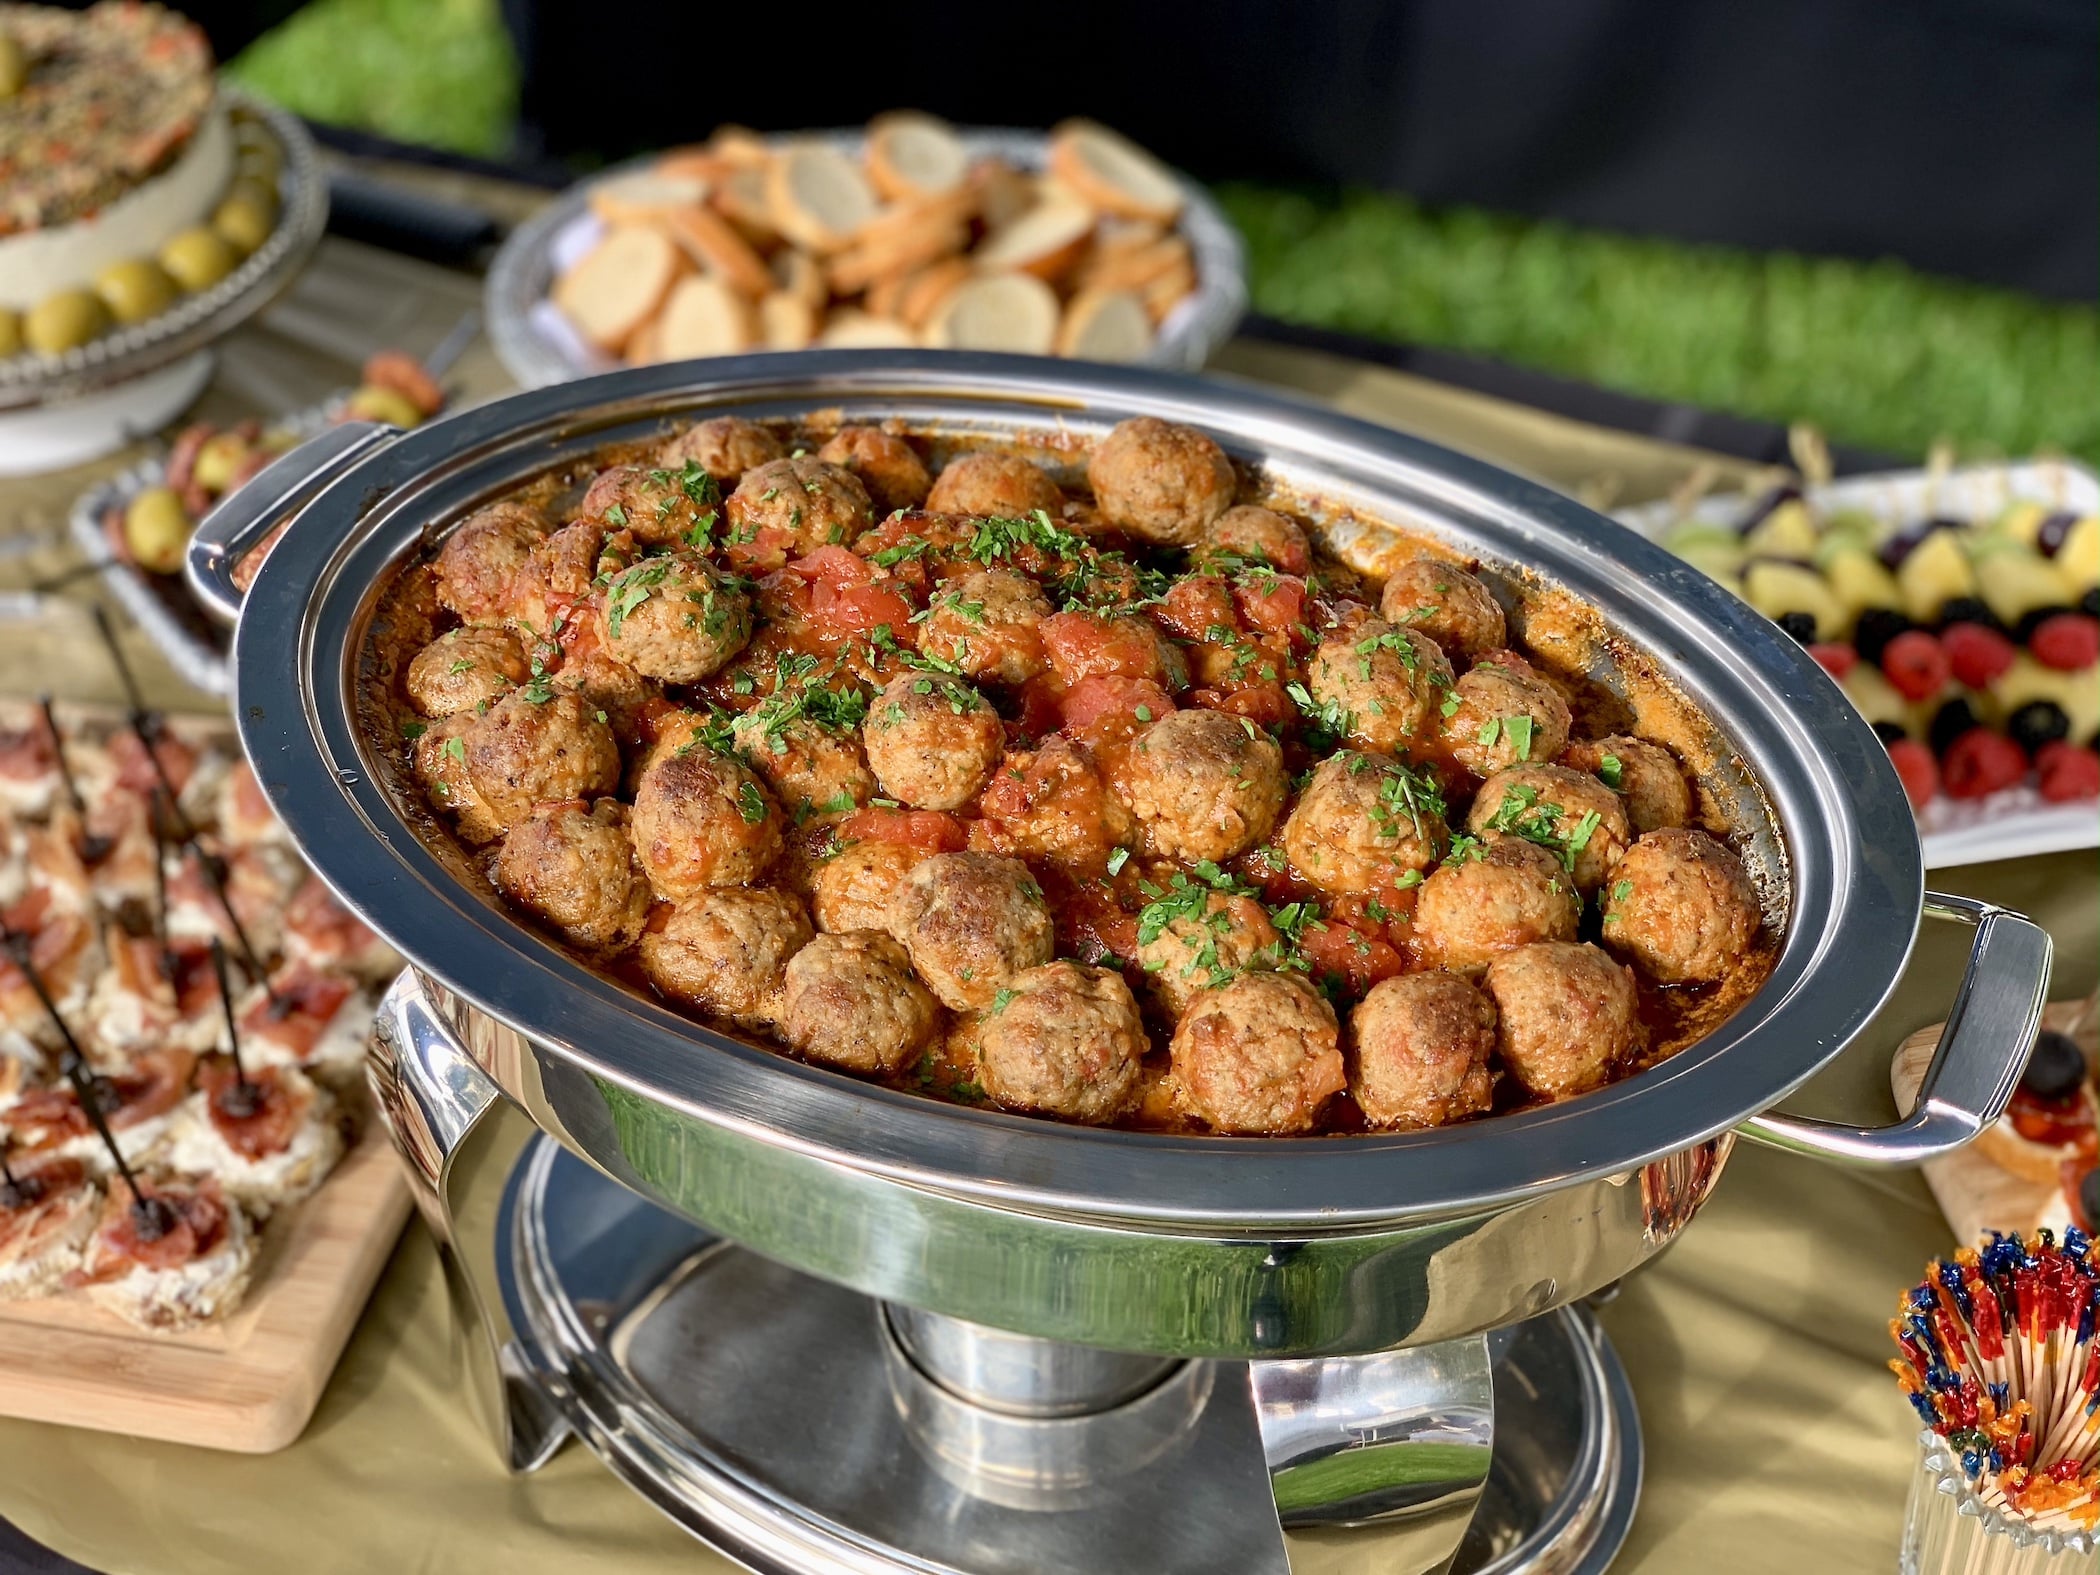 Smokey Spanish-style meatballs served in a sauce of fire-roasted tomatoes and Sofrito.